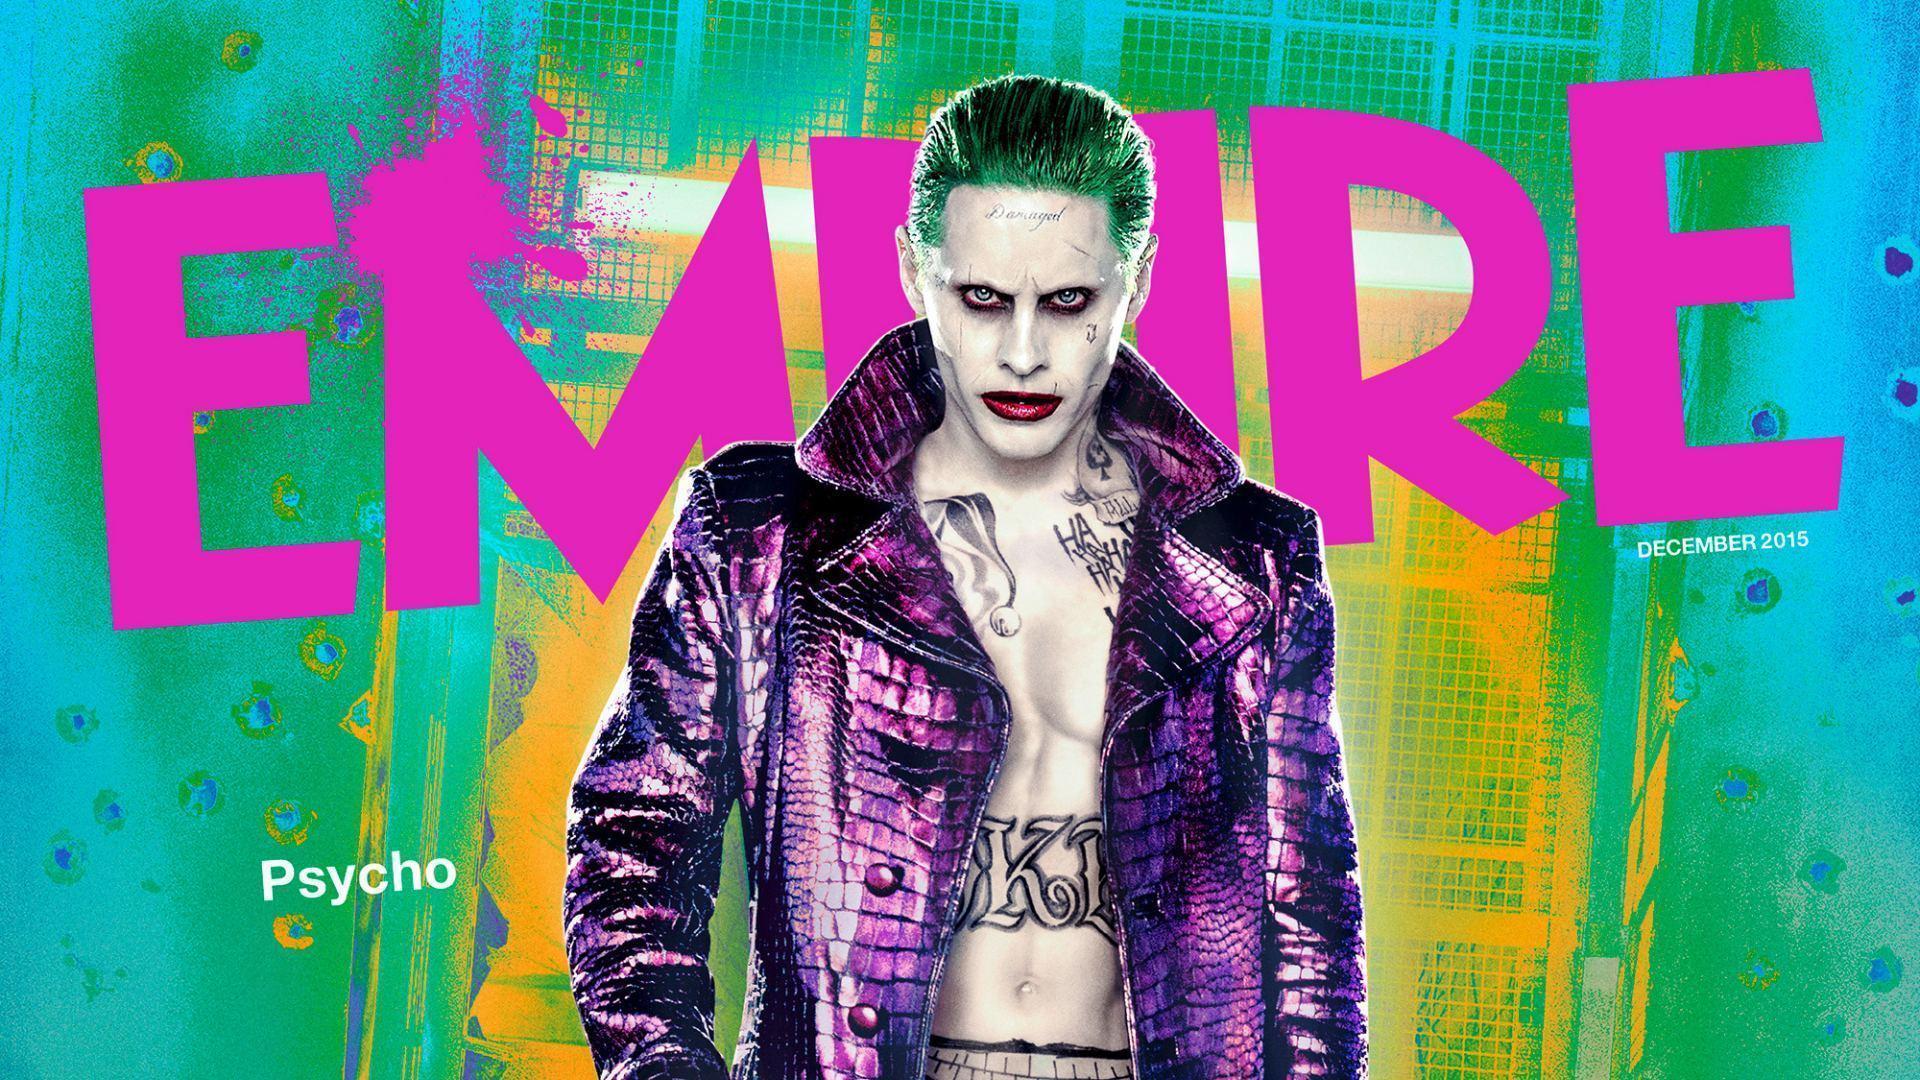 Jared Leto as "The Joker" in Suicide Squad Computer Wallpaper